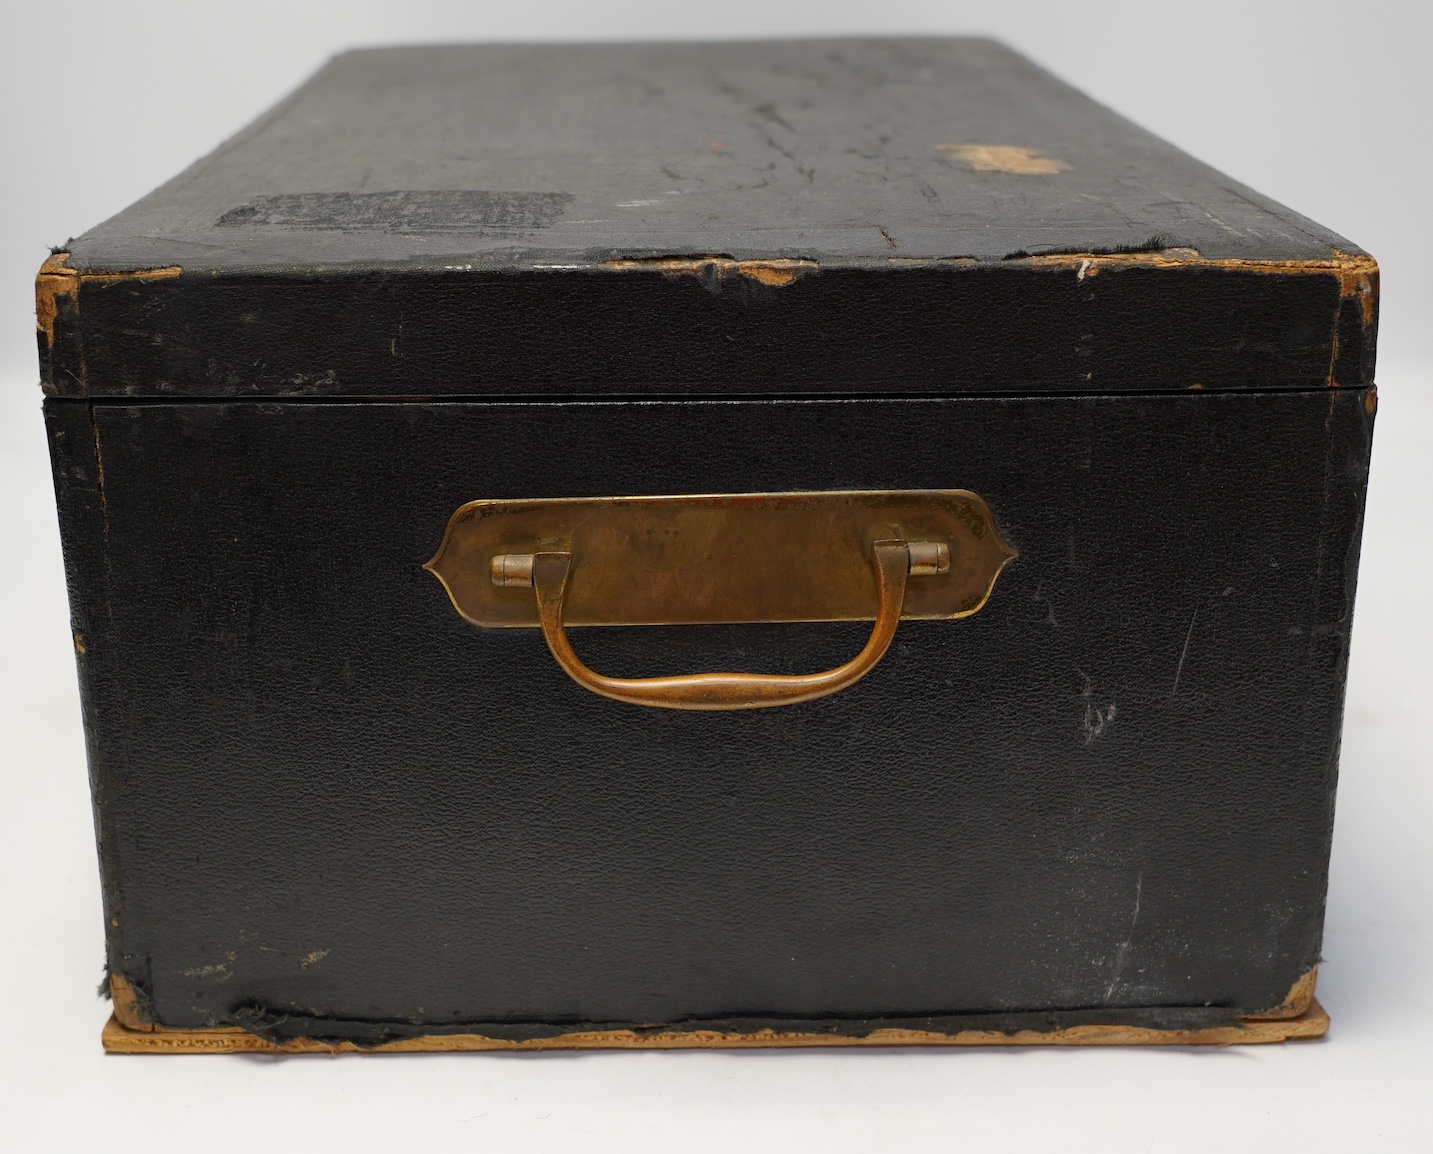 A Cardeilhac strong box. Condition - poor